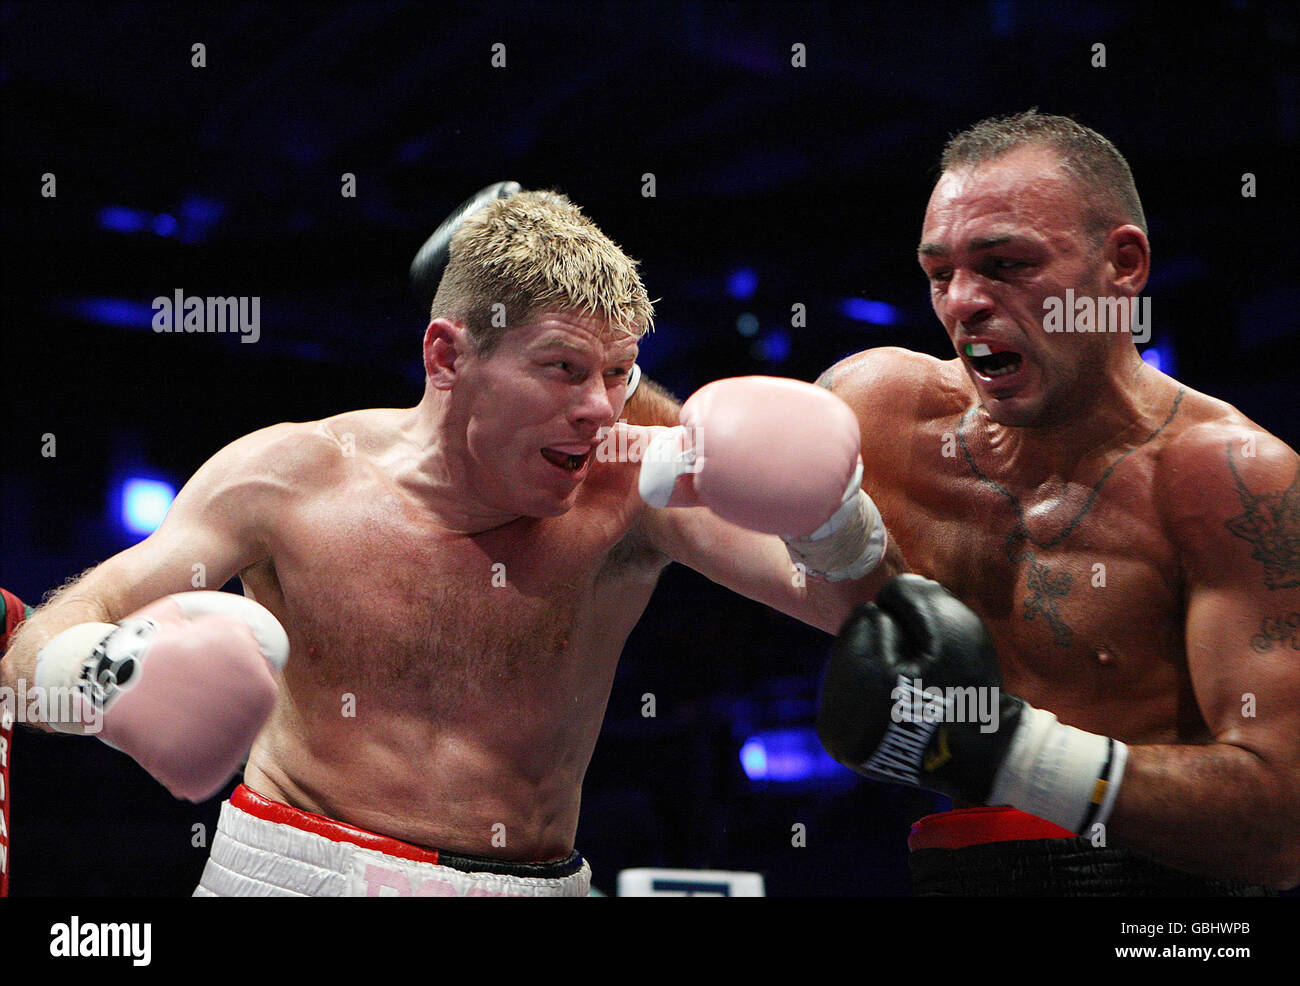 Boxing - Jim Rock v Alessio Furlan - Middleweight Bout - Dublino O2 Arena  Foto stock - Alamy